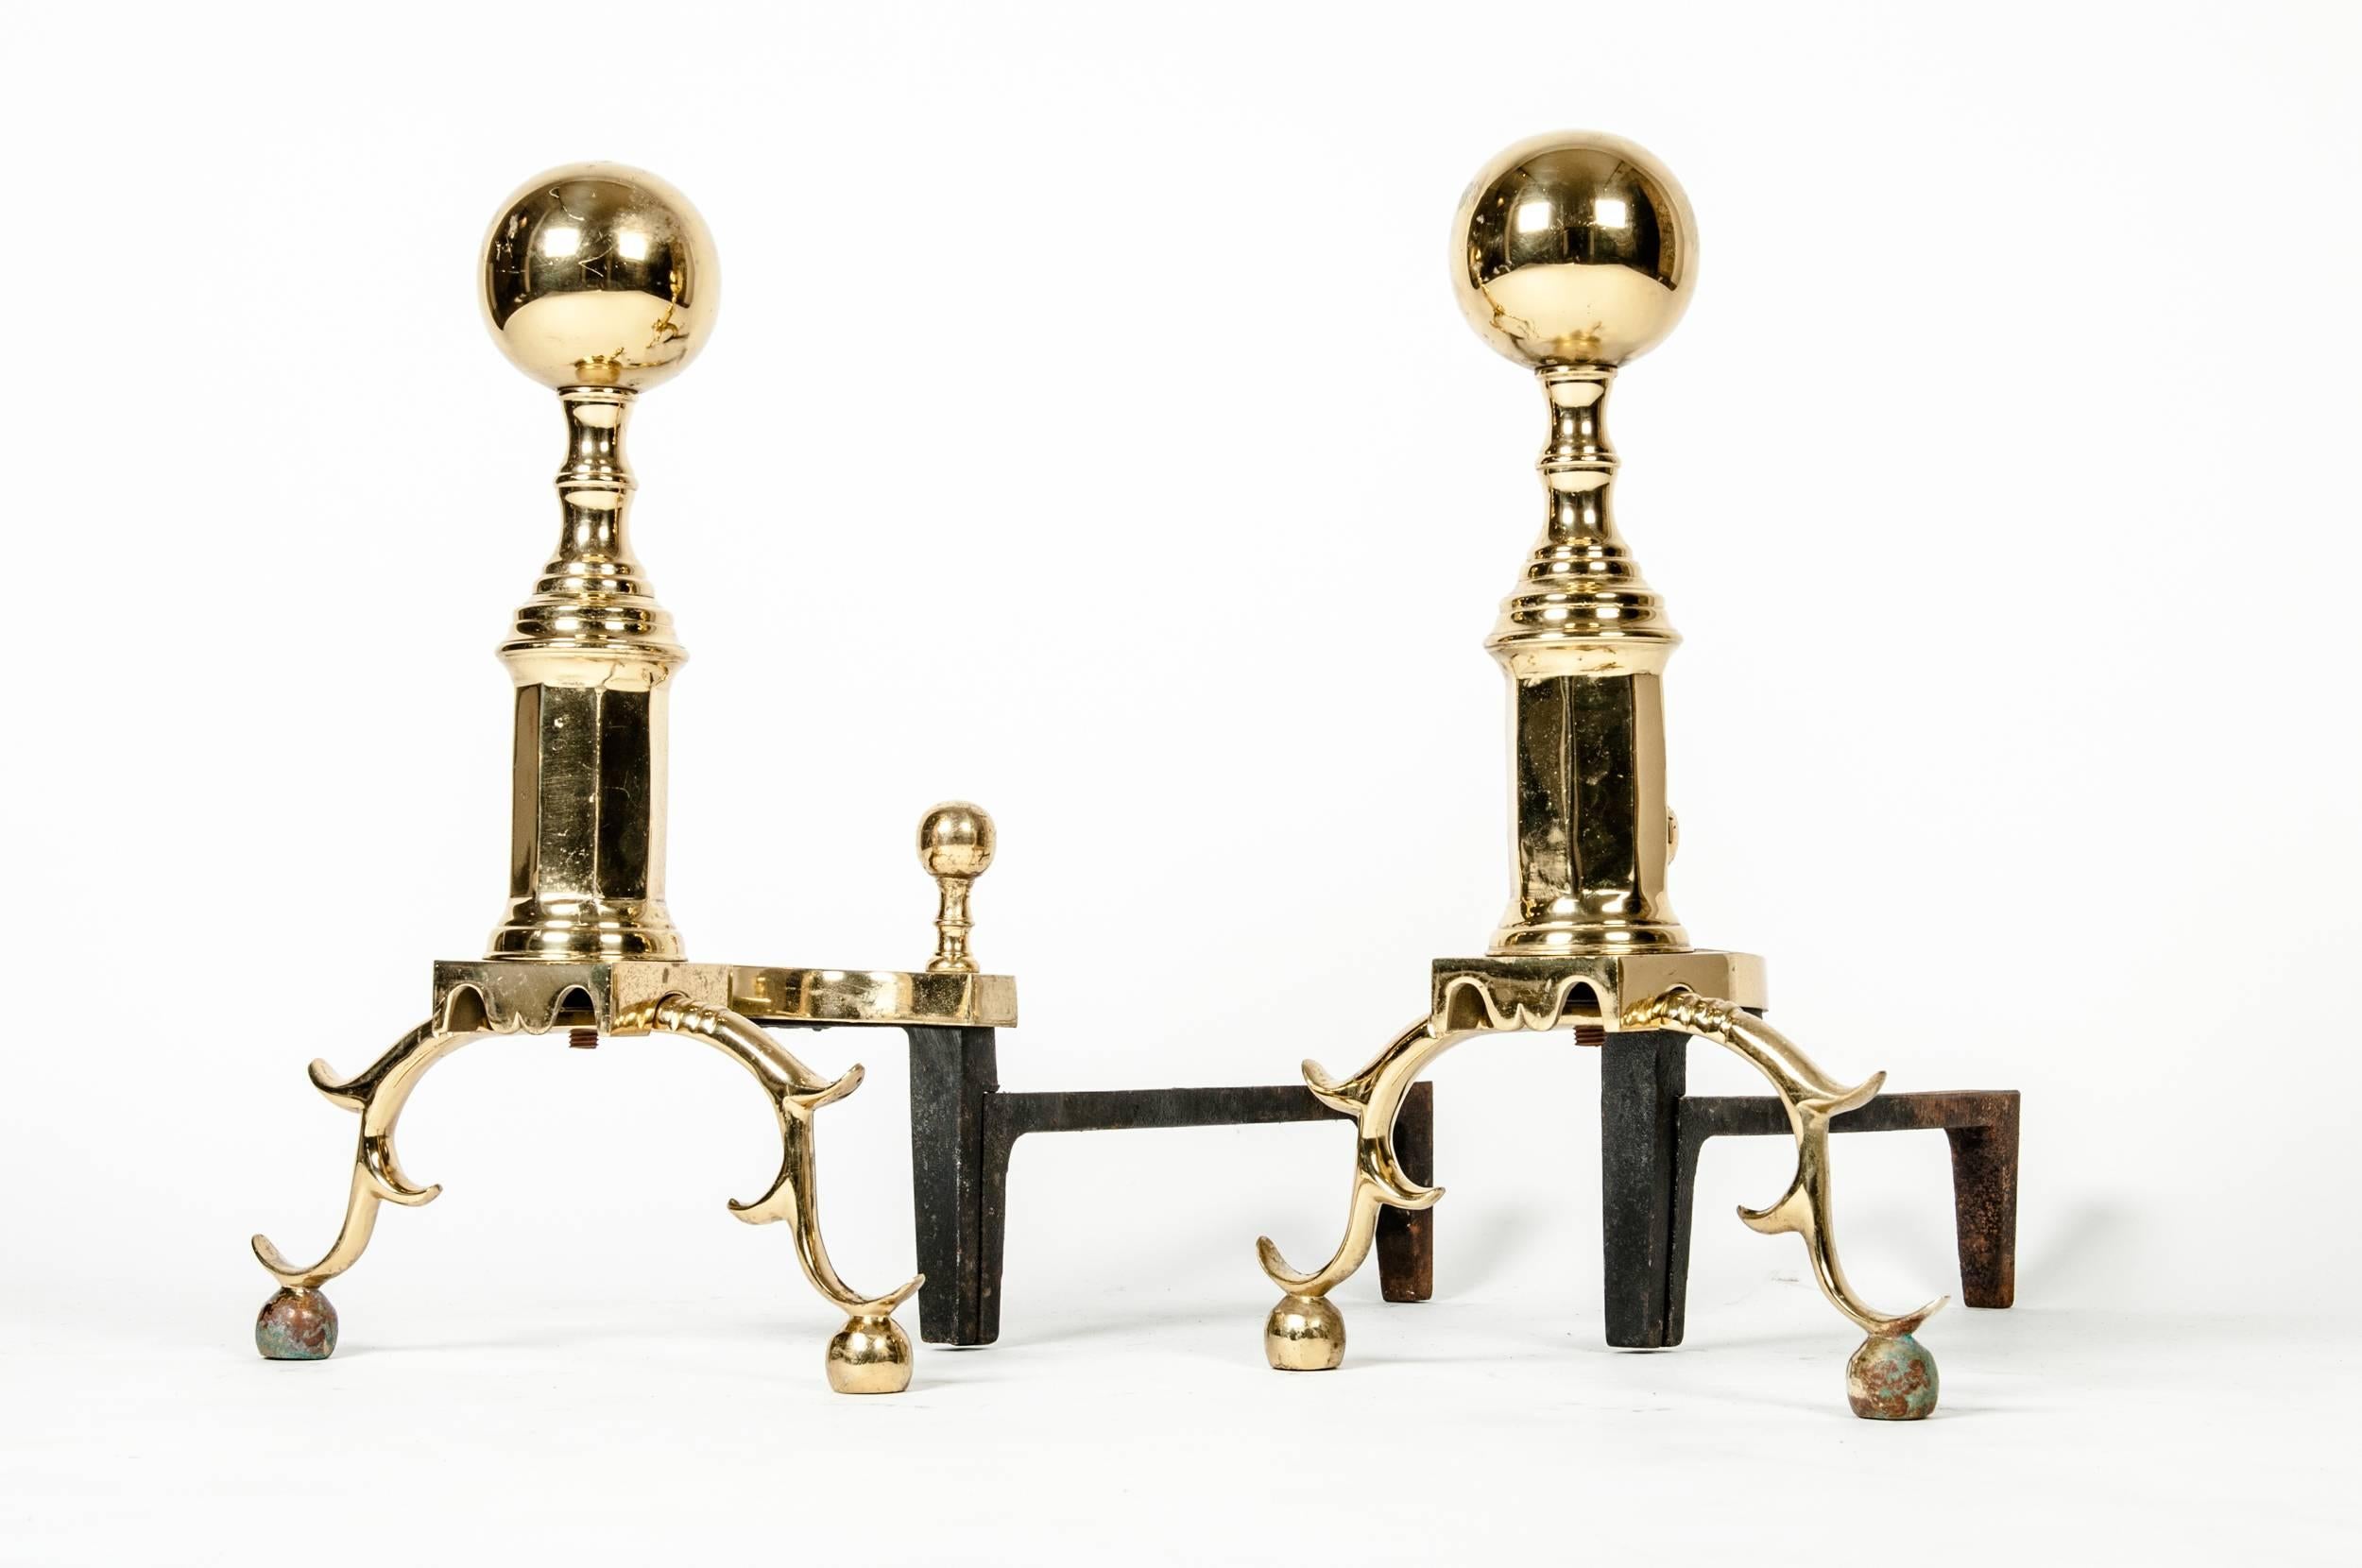 Vintage solid brass andirons. The andiron measure 18 inches high x 22 inches long.